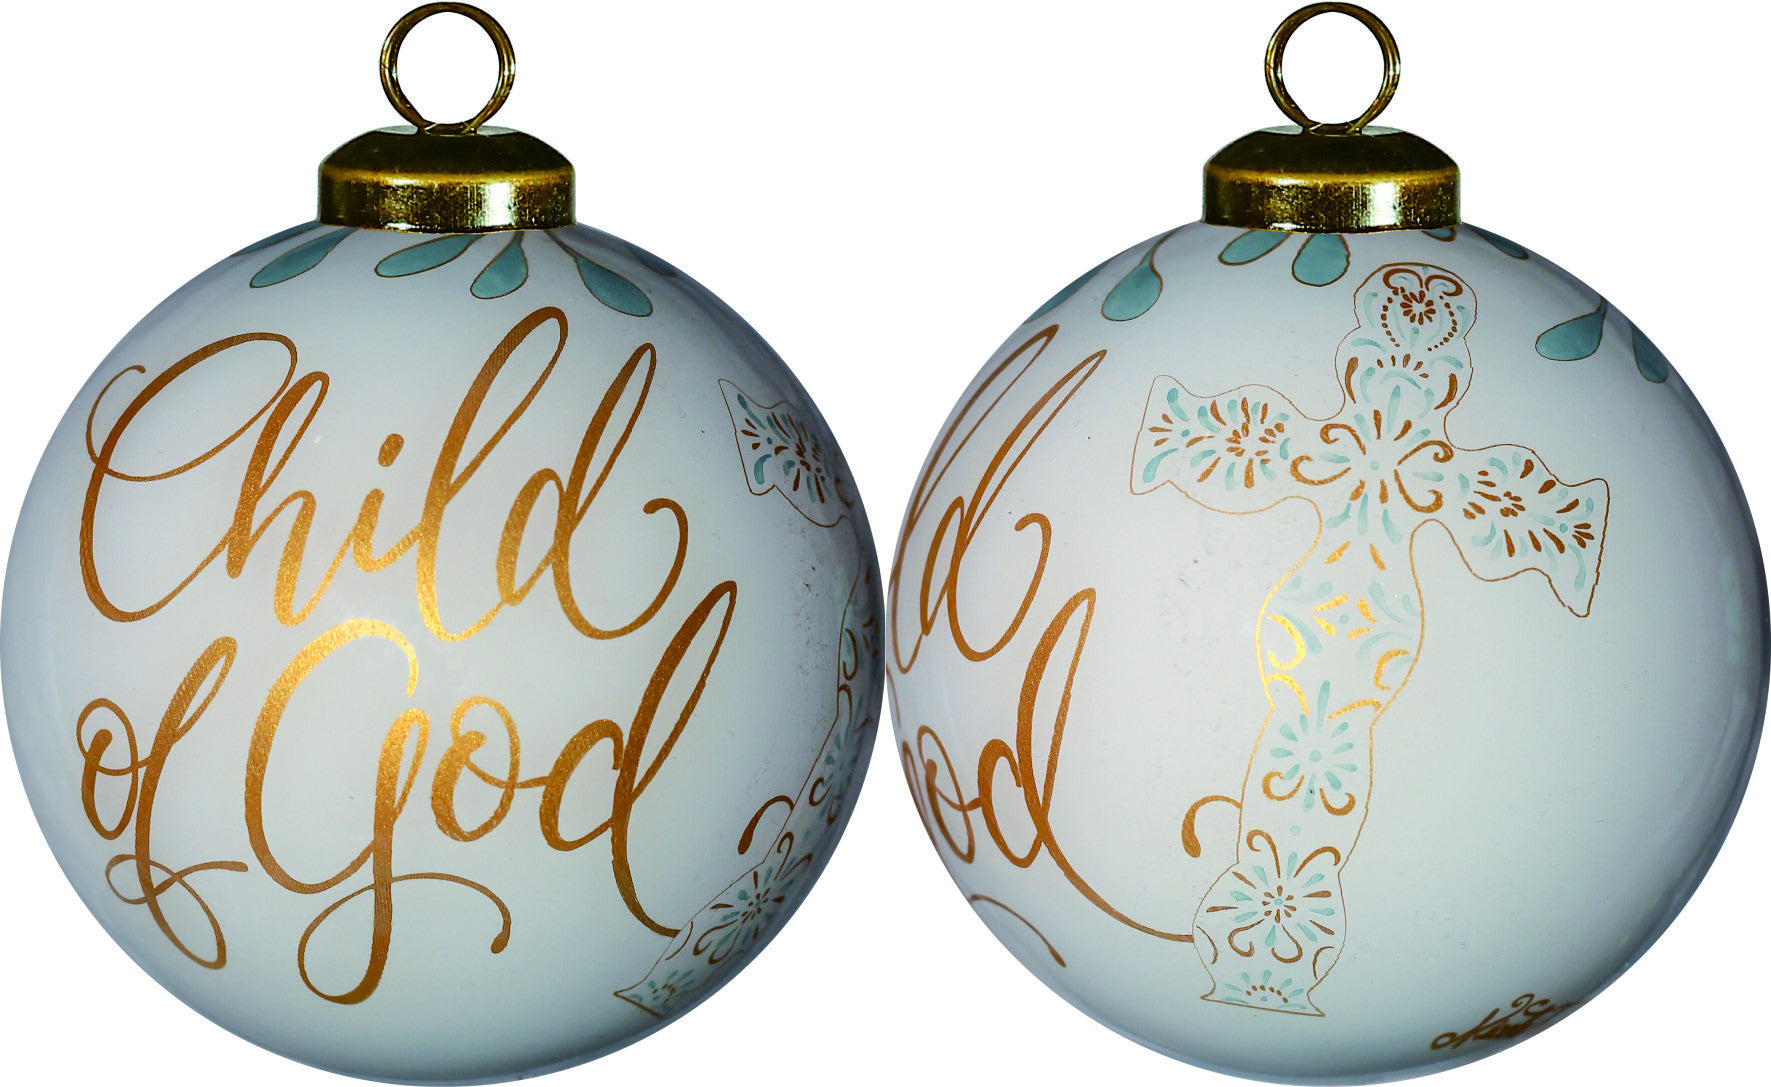 White-and-Gold-Child-of-God-Hand-Painted-Mouth-Blown-Glass-Ornament-Christmas-Ornaments